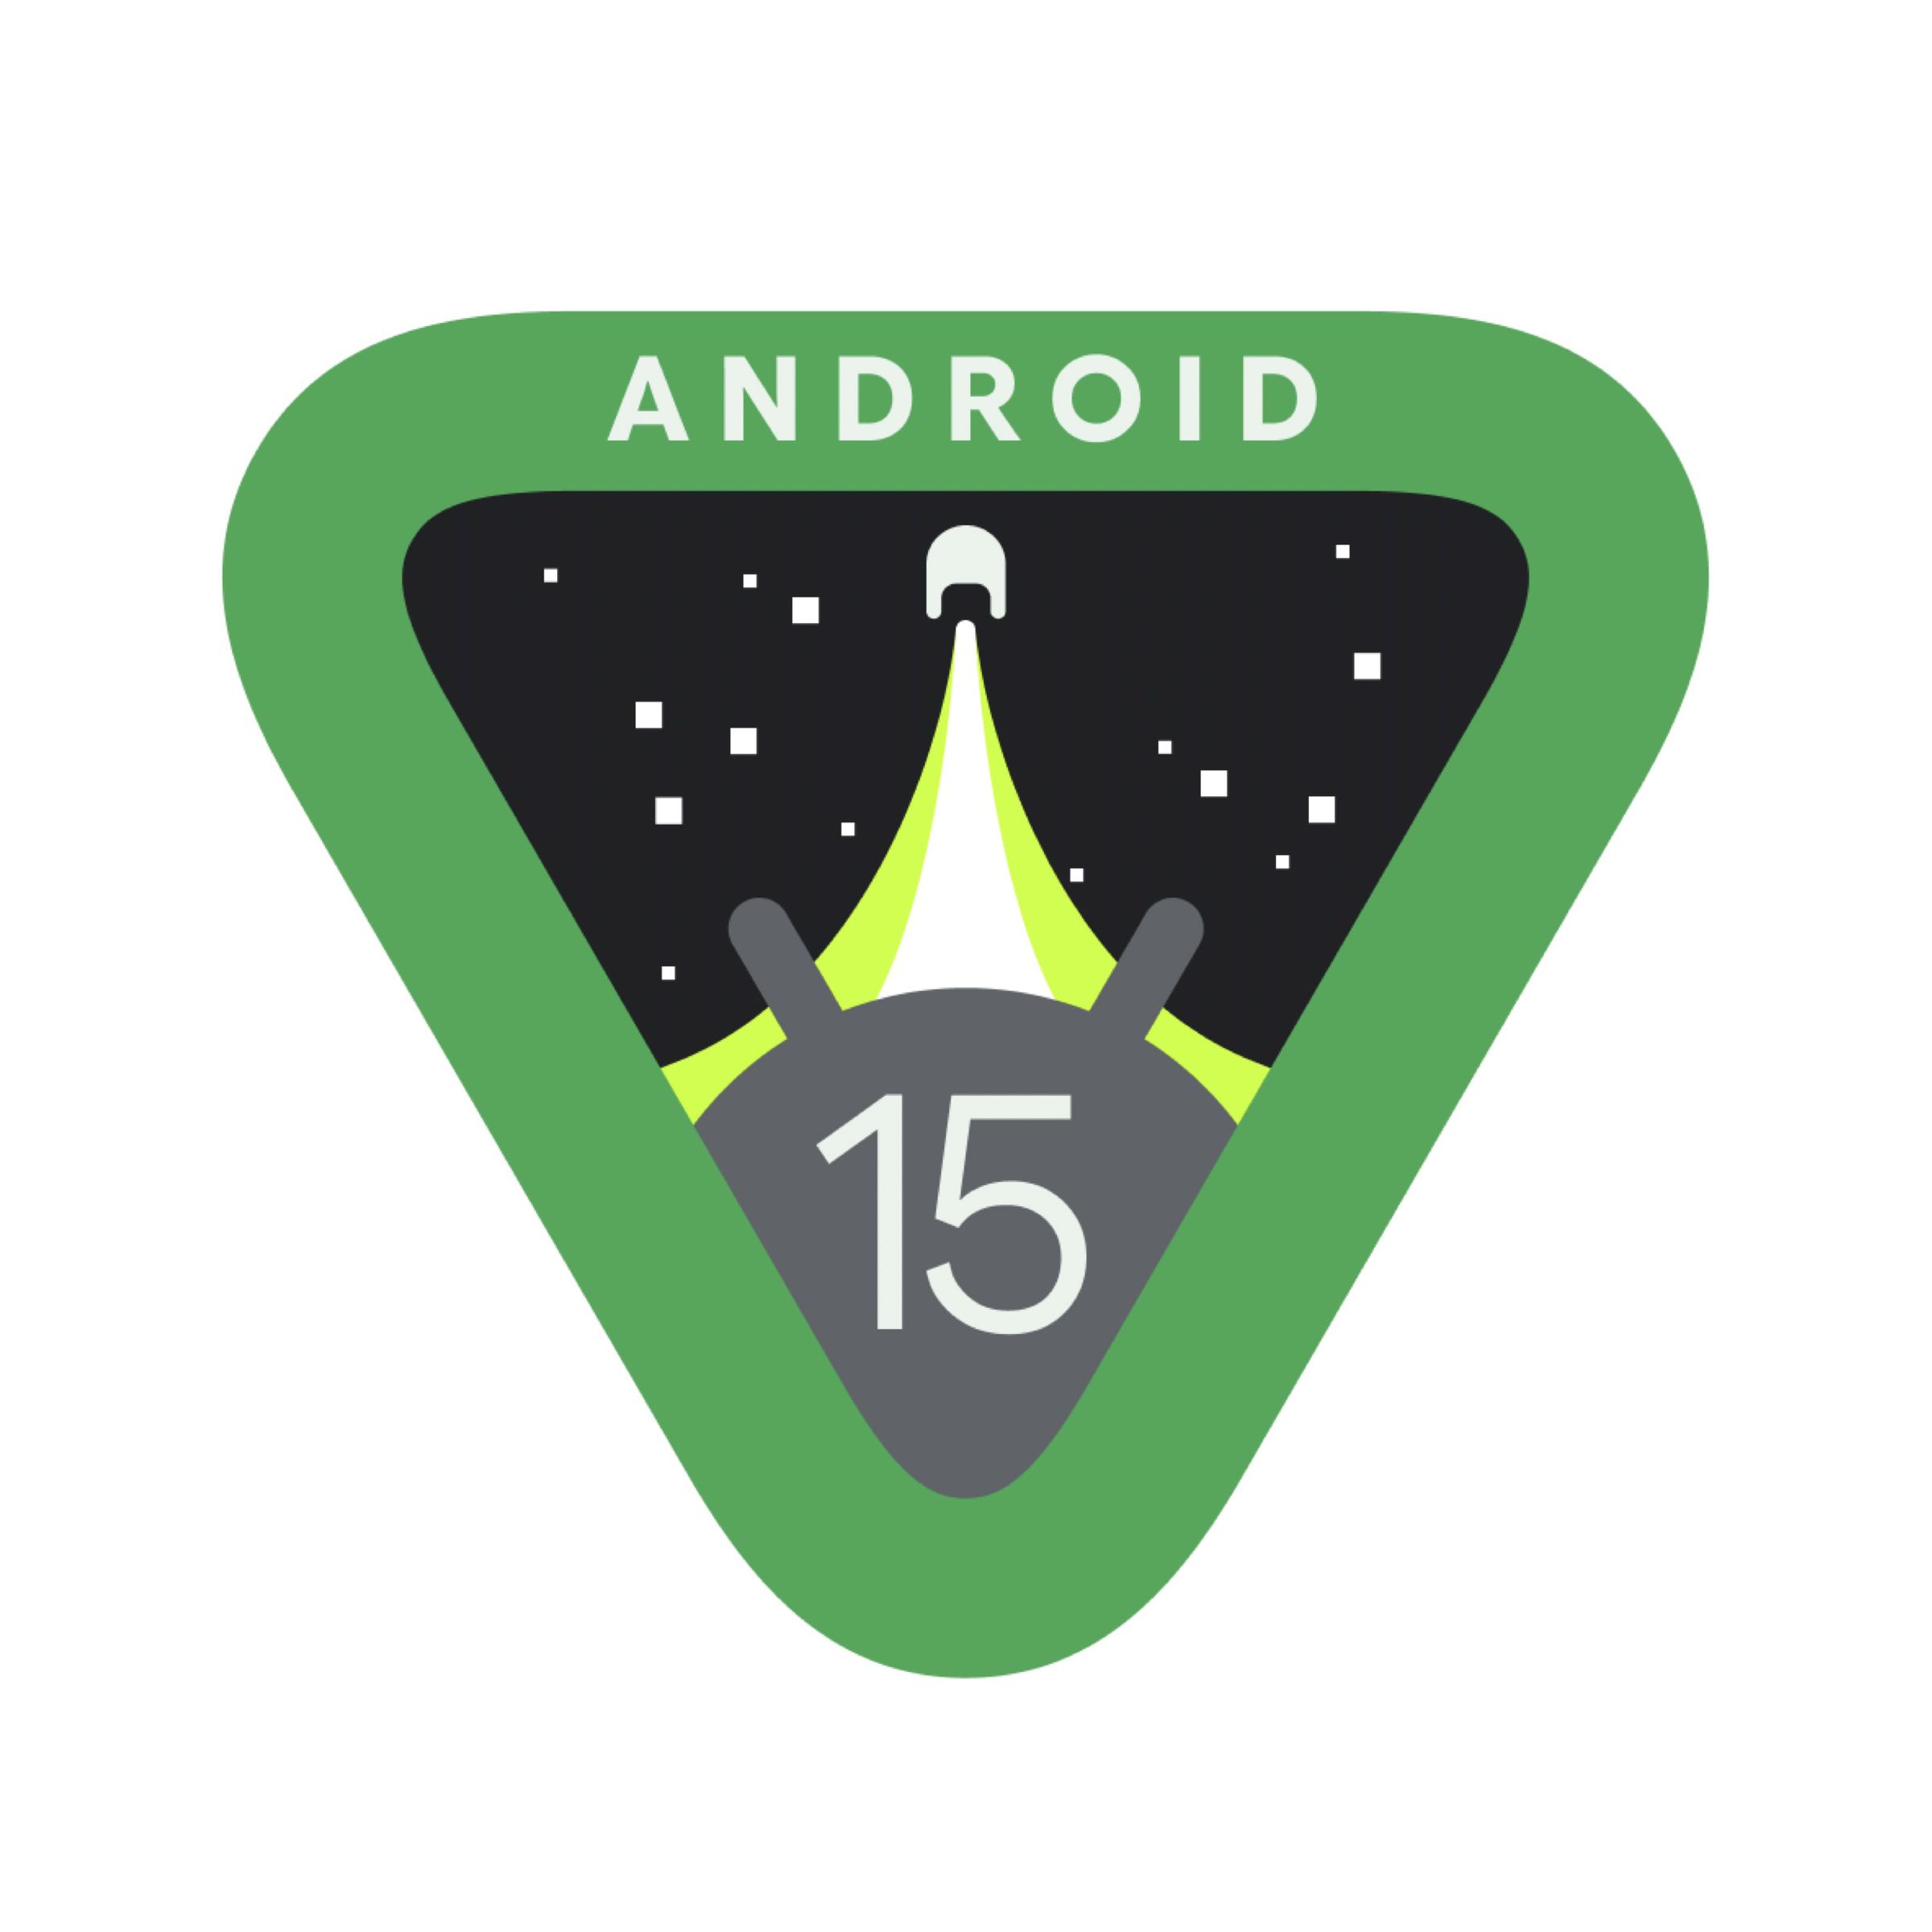 android 15 logo, a green upside-down triangle with a rocker launching into the stars and an android character looking up